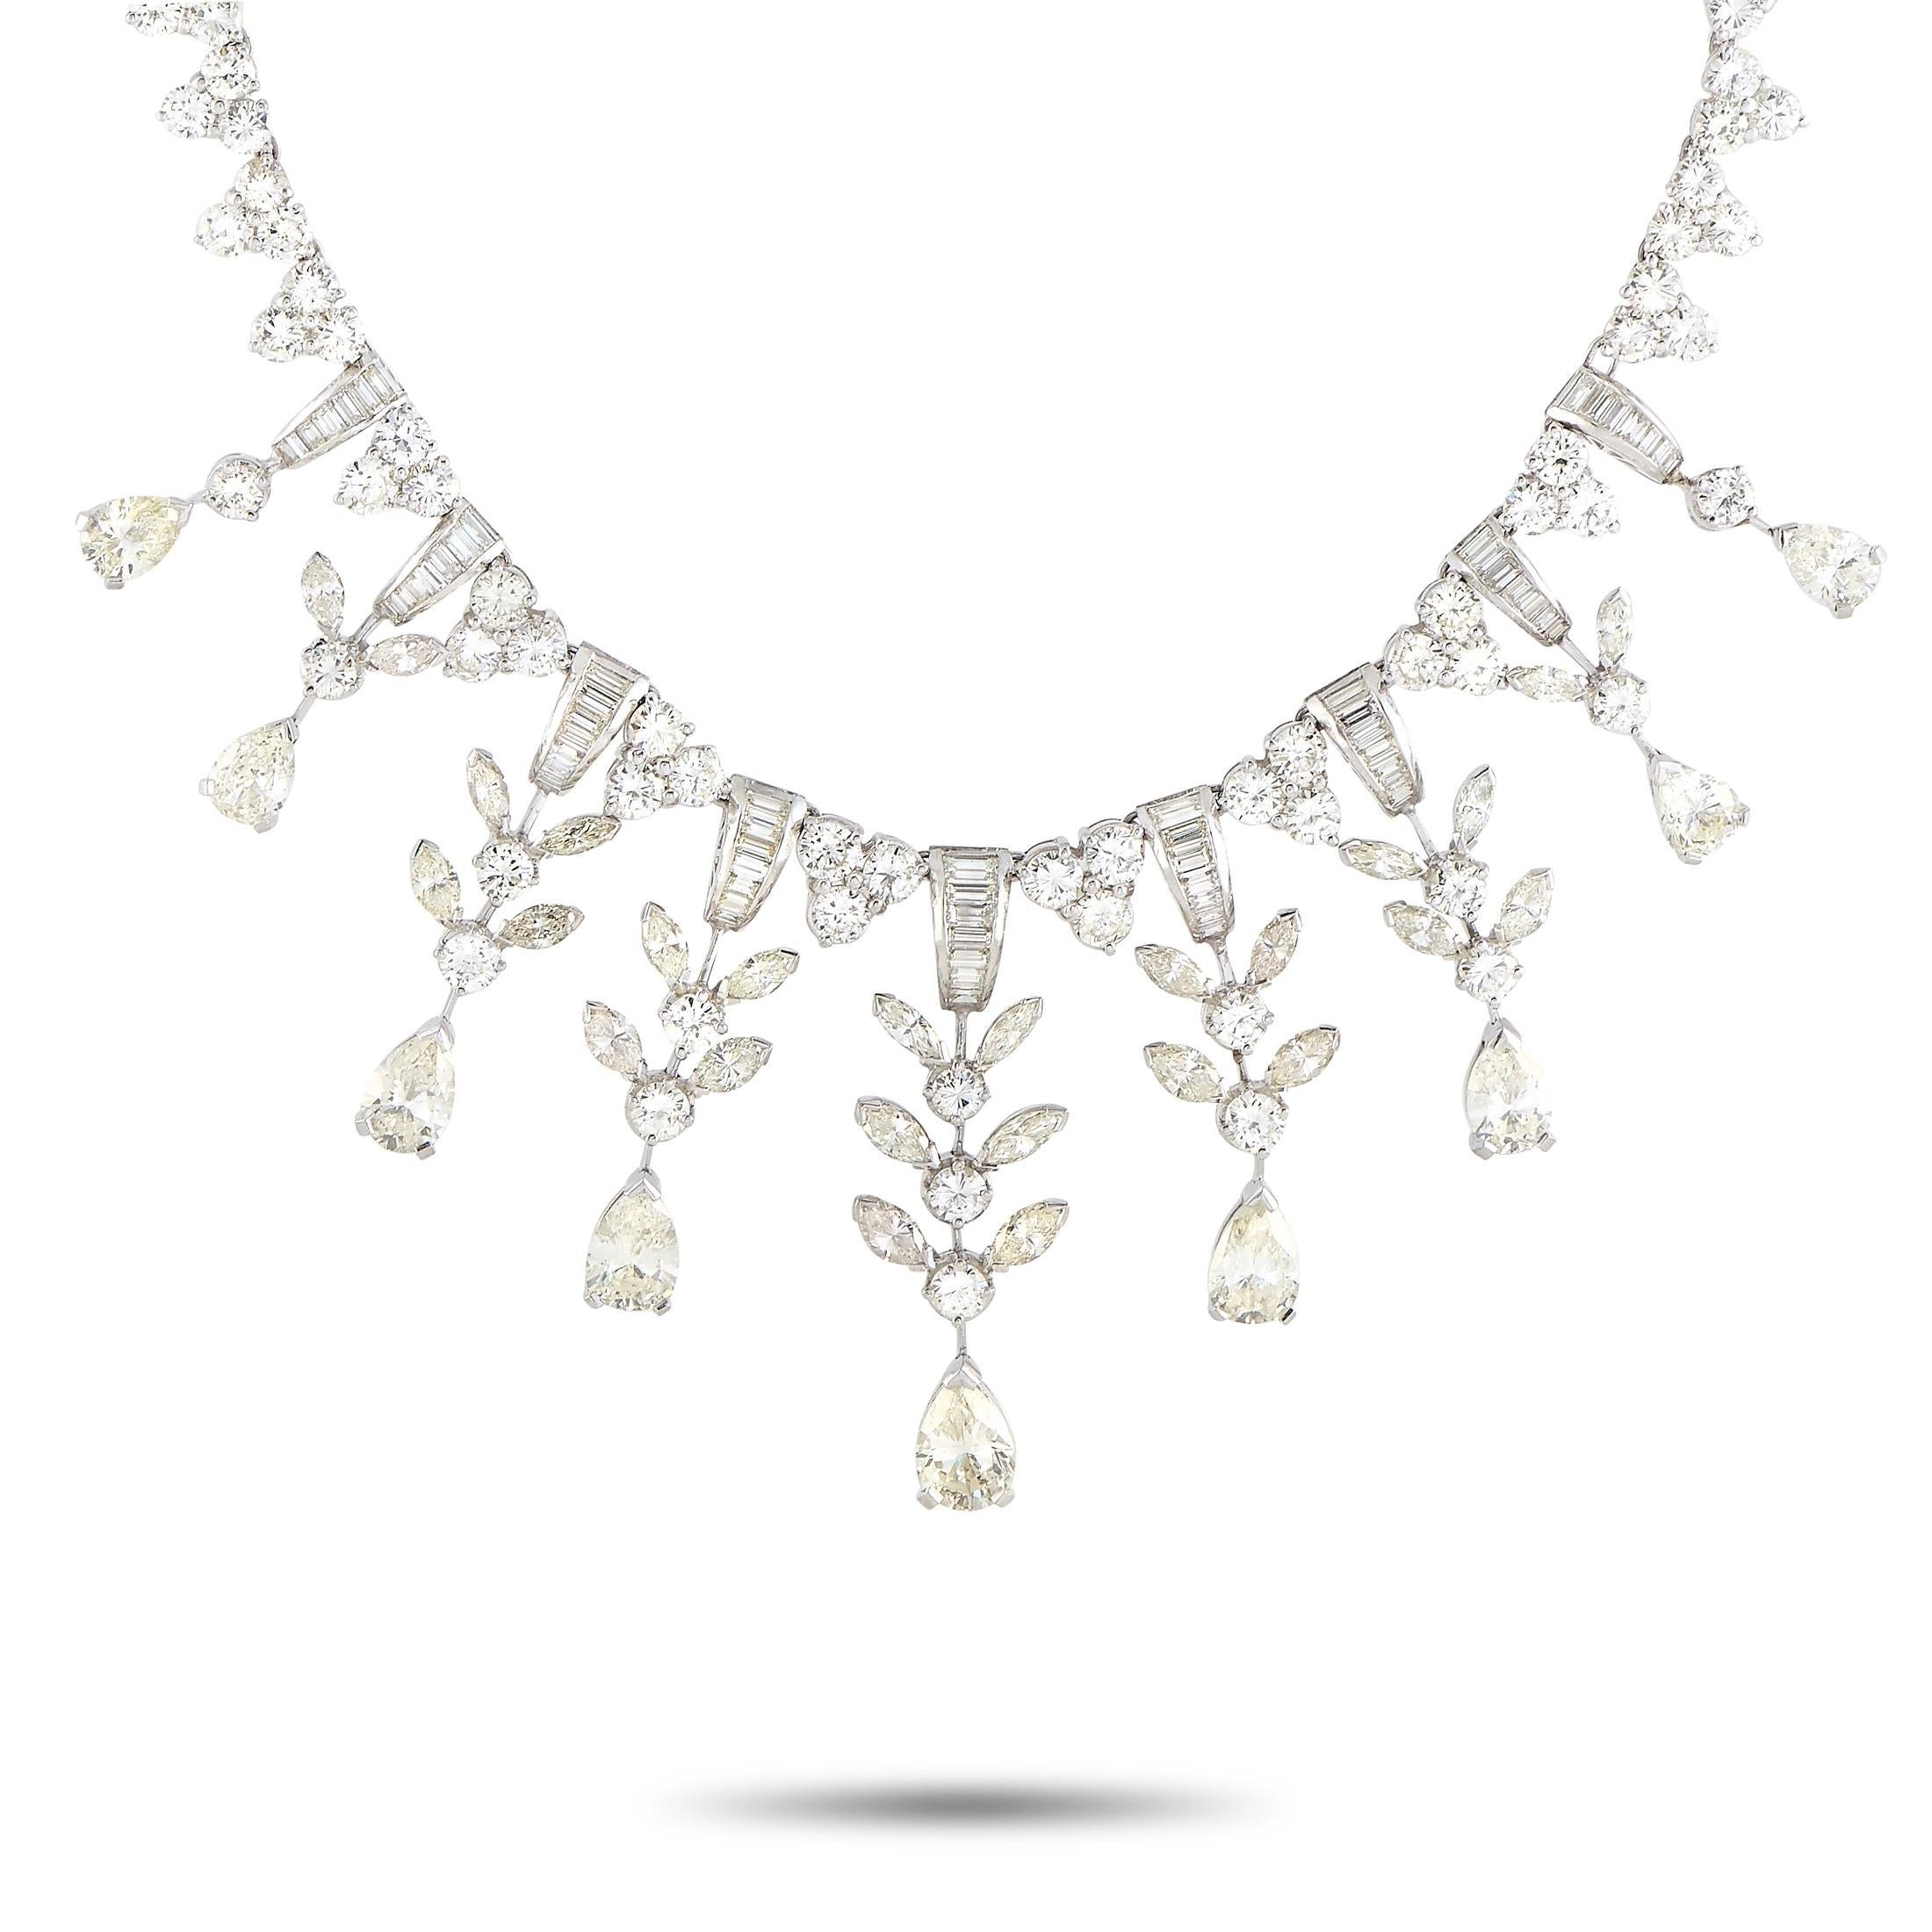 A showstopping piece of bridal jewelry, this LB Exclusive Platinum Diamond Necklace shimmers with 45 carats of round, pear, and marquise diamonds. The necklace is lined with trio clusters of round diamonds and has a 1.5-inch by 4-inch vine-drop